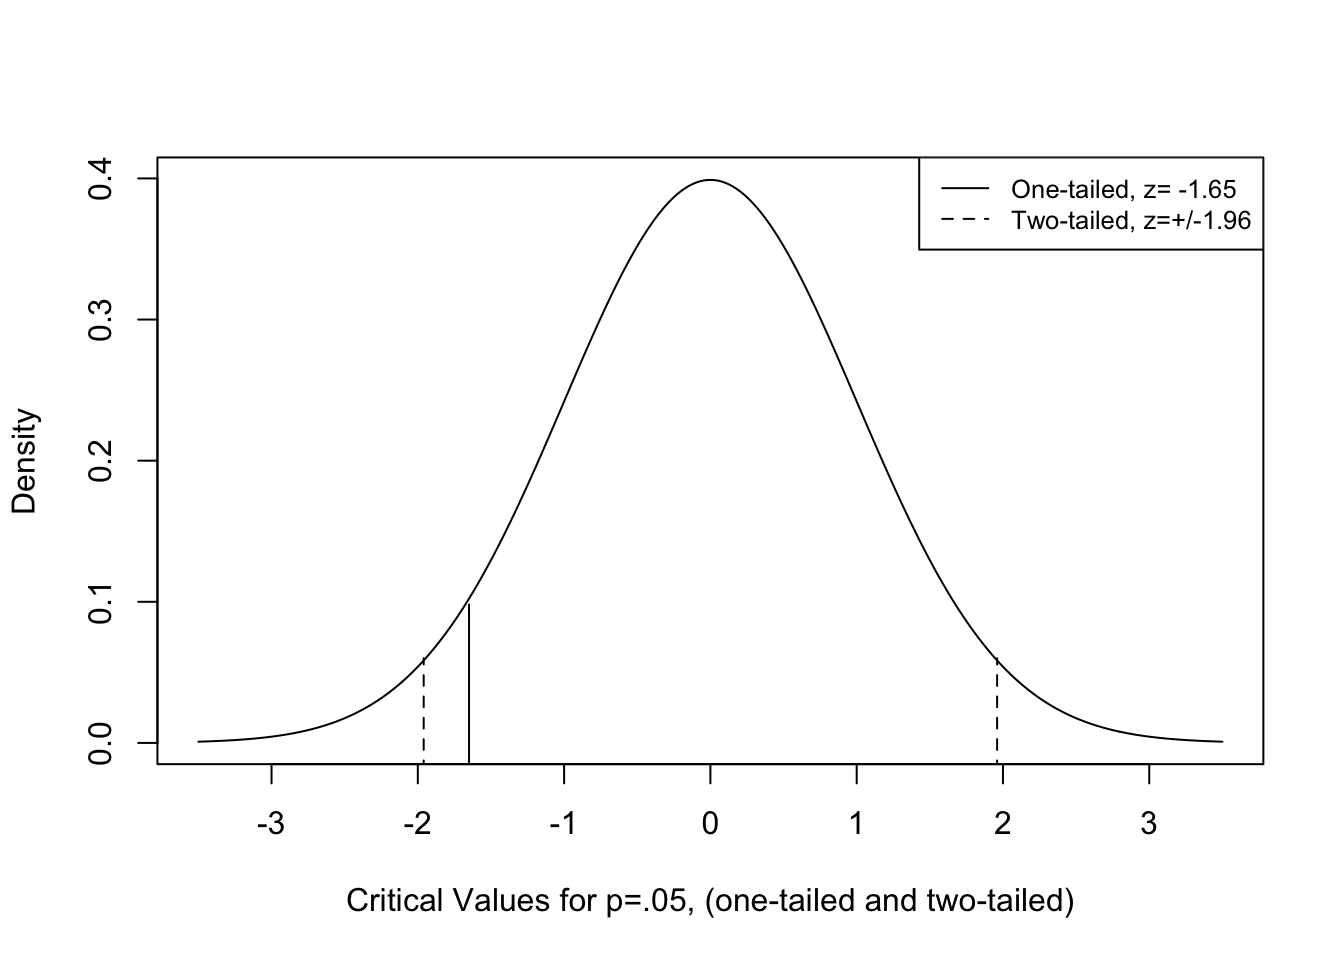 Critical Values for One and Two-tailed Tests